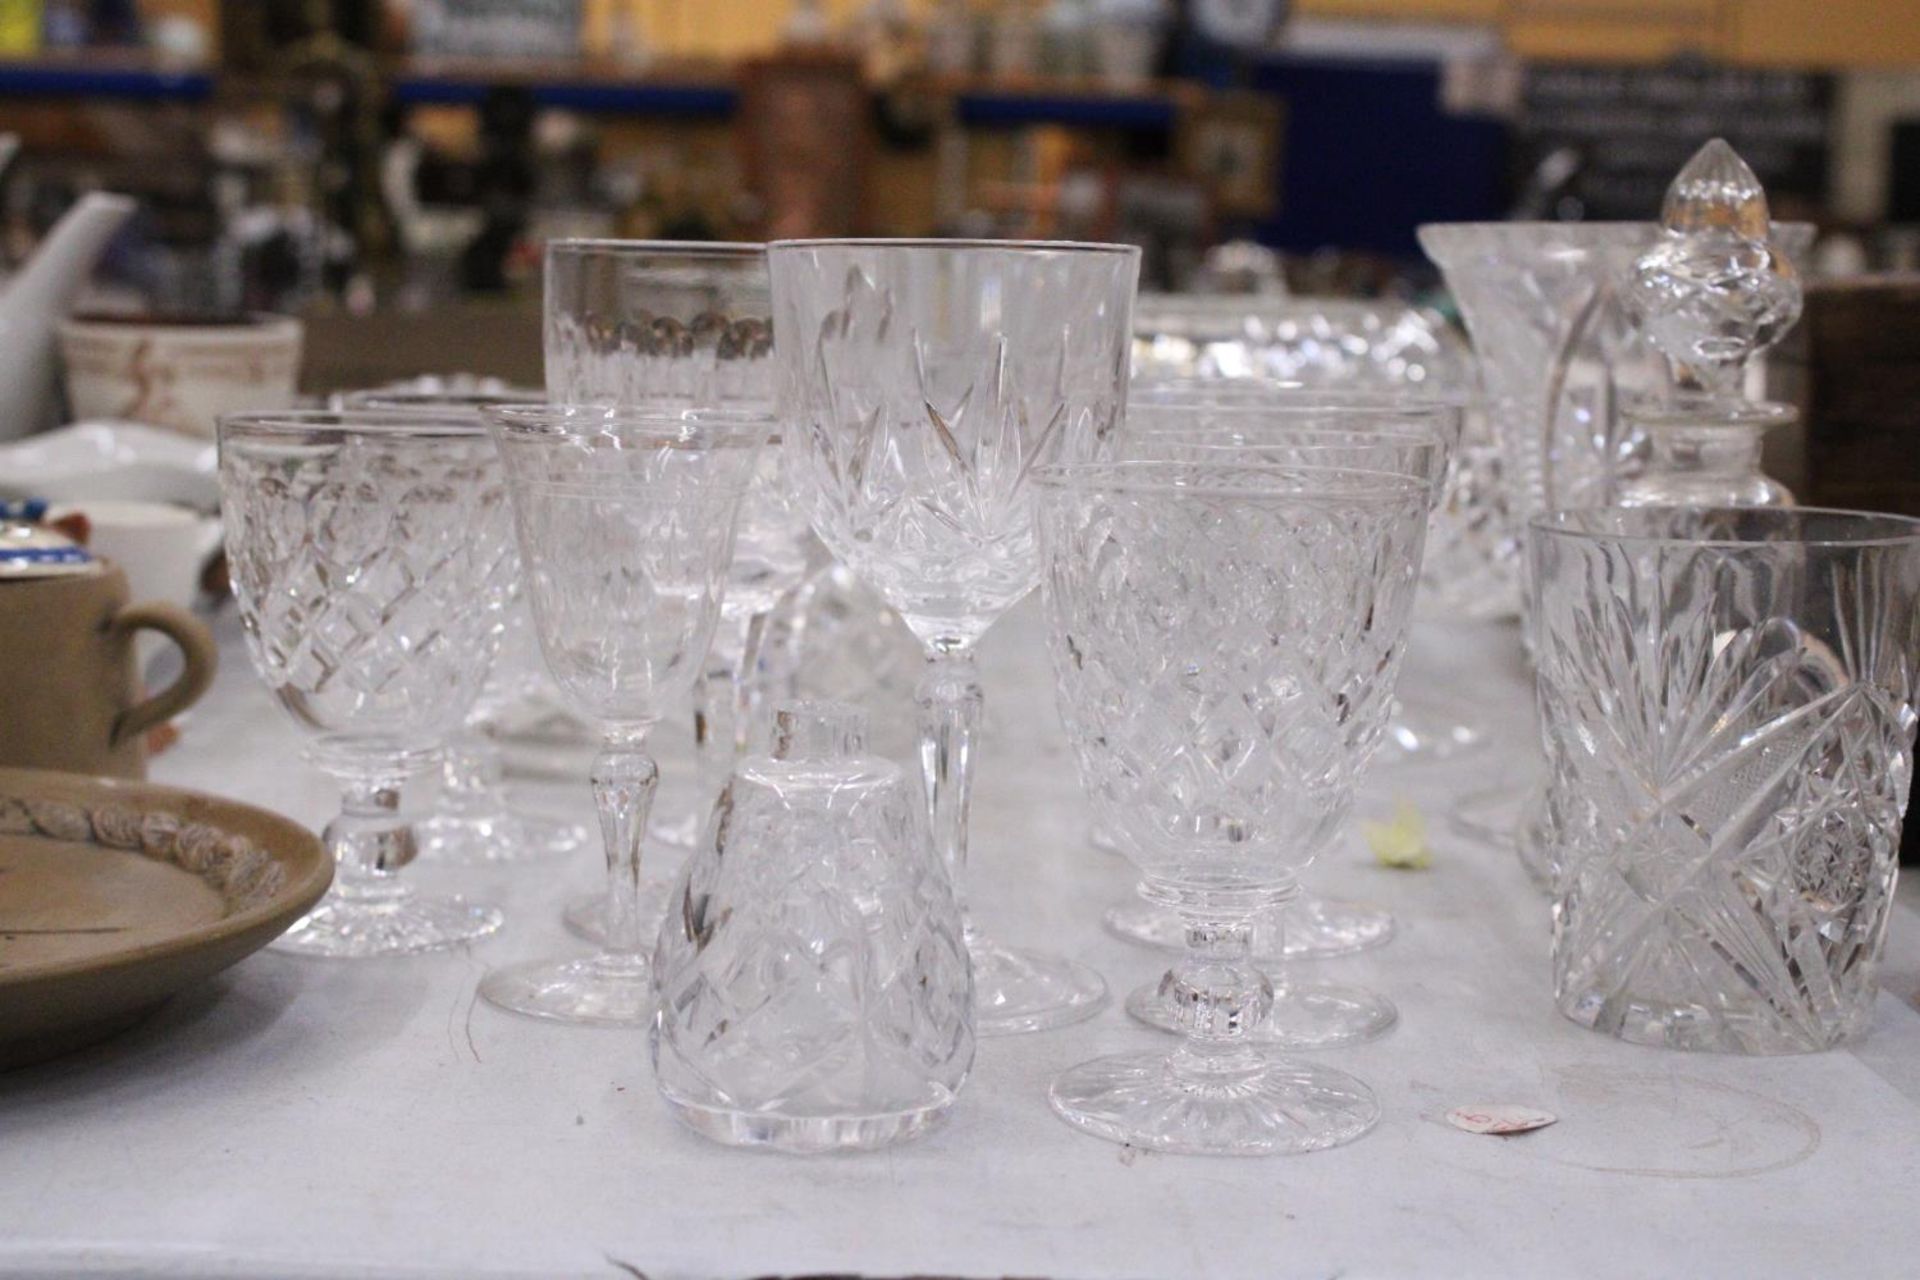 A LARGE QUANTITY OF GLASSWARE TO INCLUDE BOWLS, VASES, WINE GLASSES, ETC - Image 6 of 6